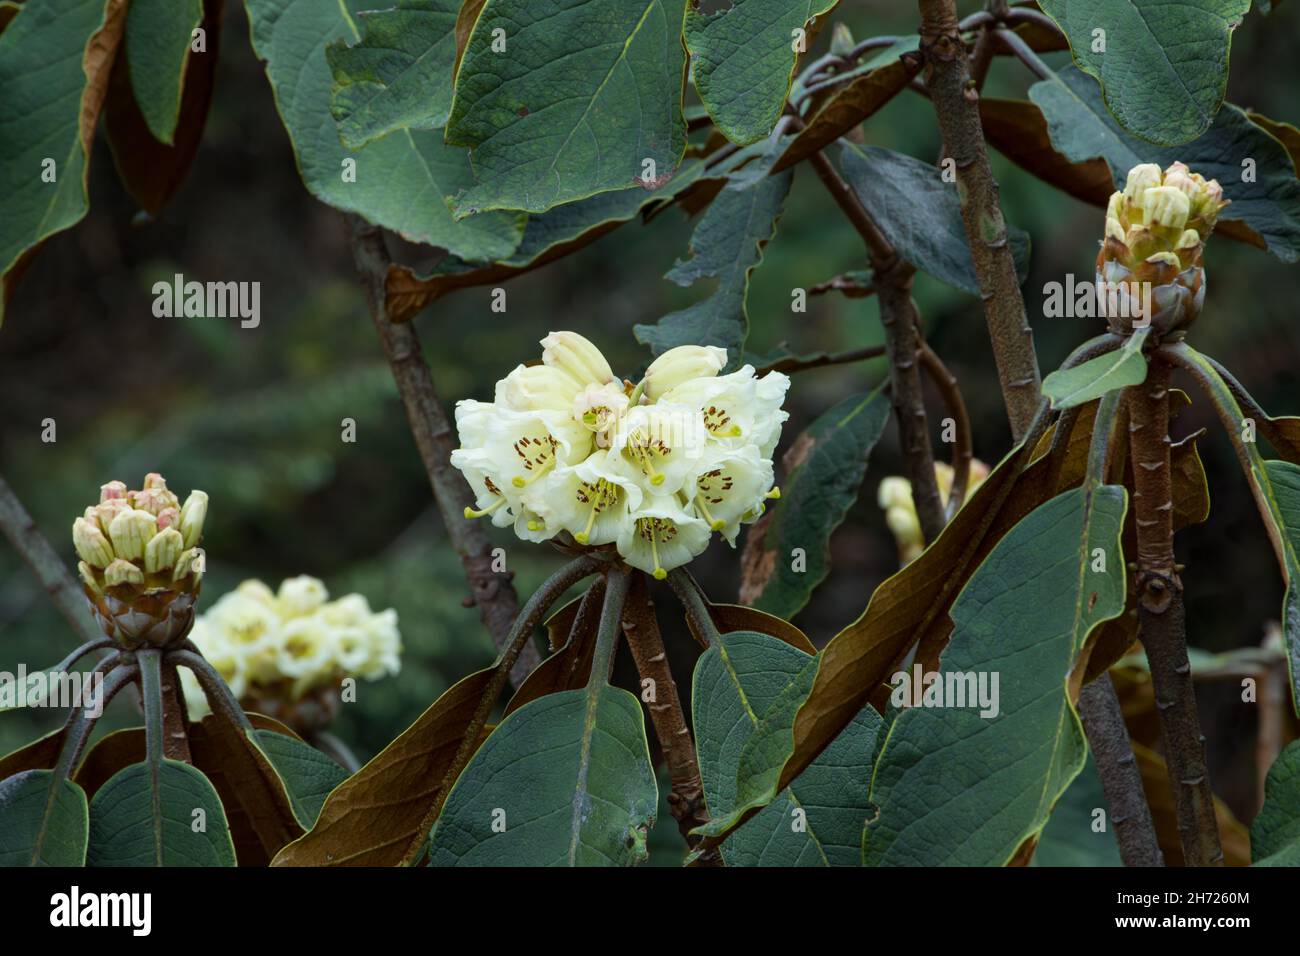 Falconer Rhododendrons, Rhododendron falconeri, in flower in the mountains of Bhutan. Stock Photo